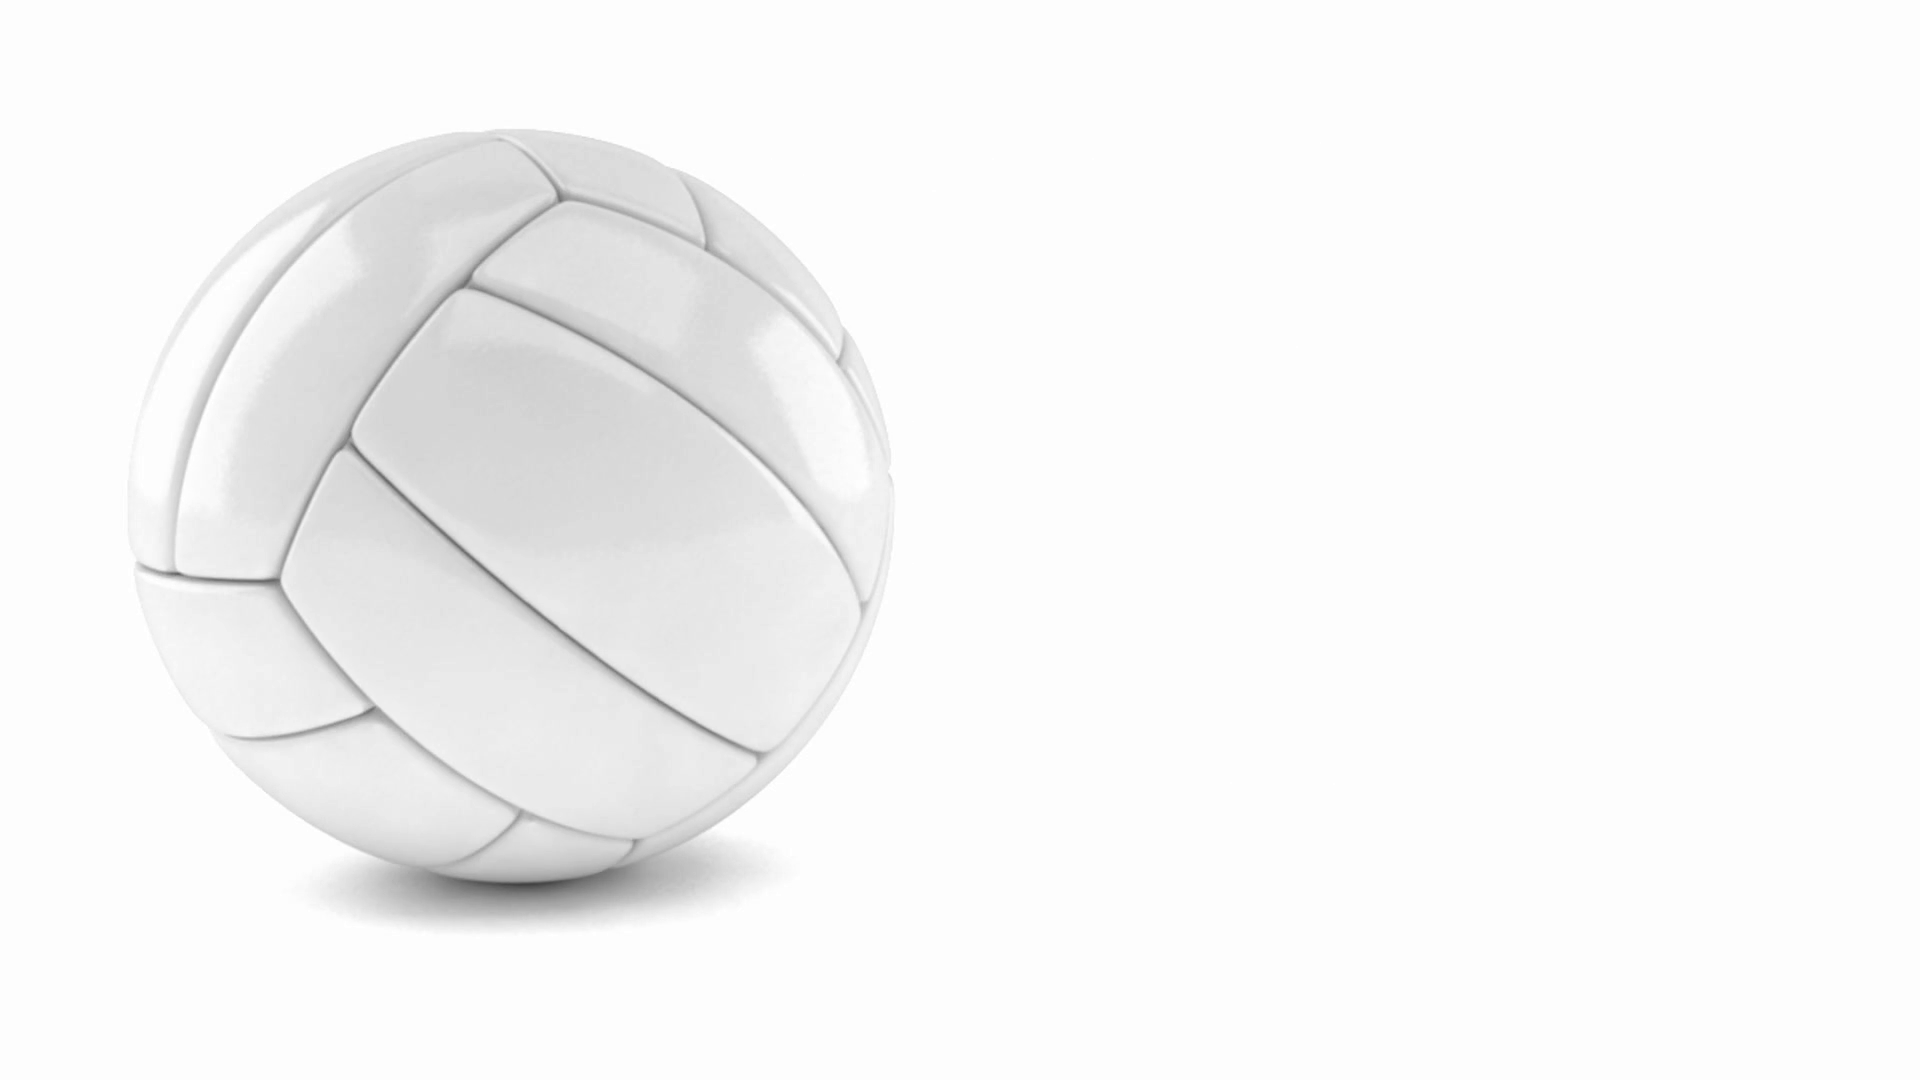 Volleyball Ball And Net PNG - 154837